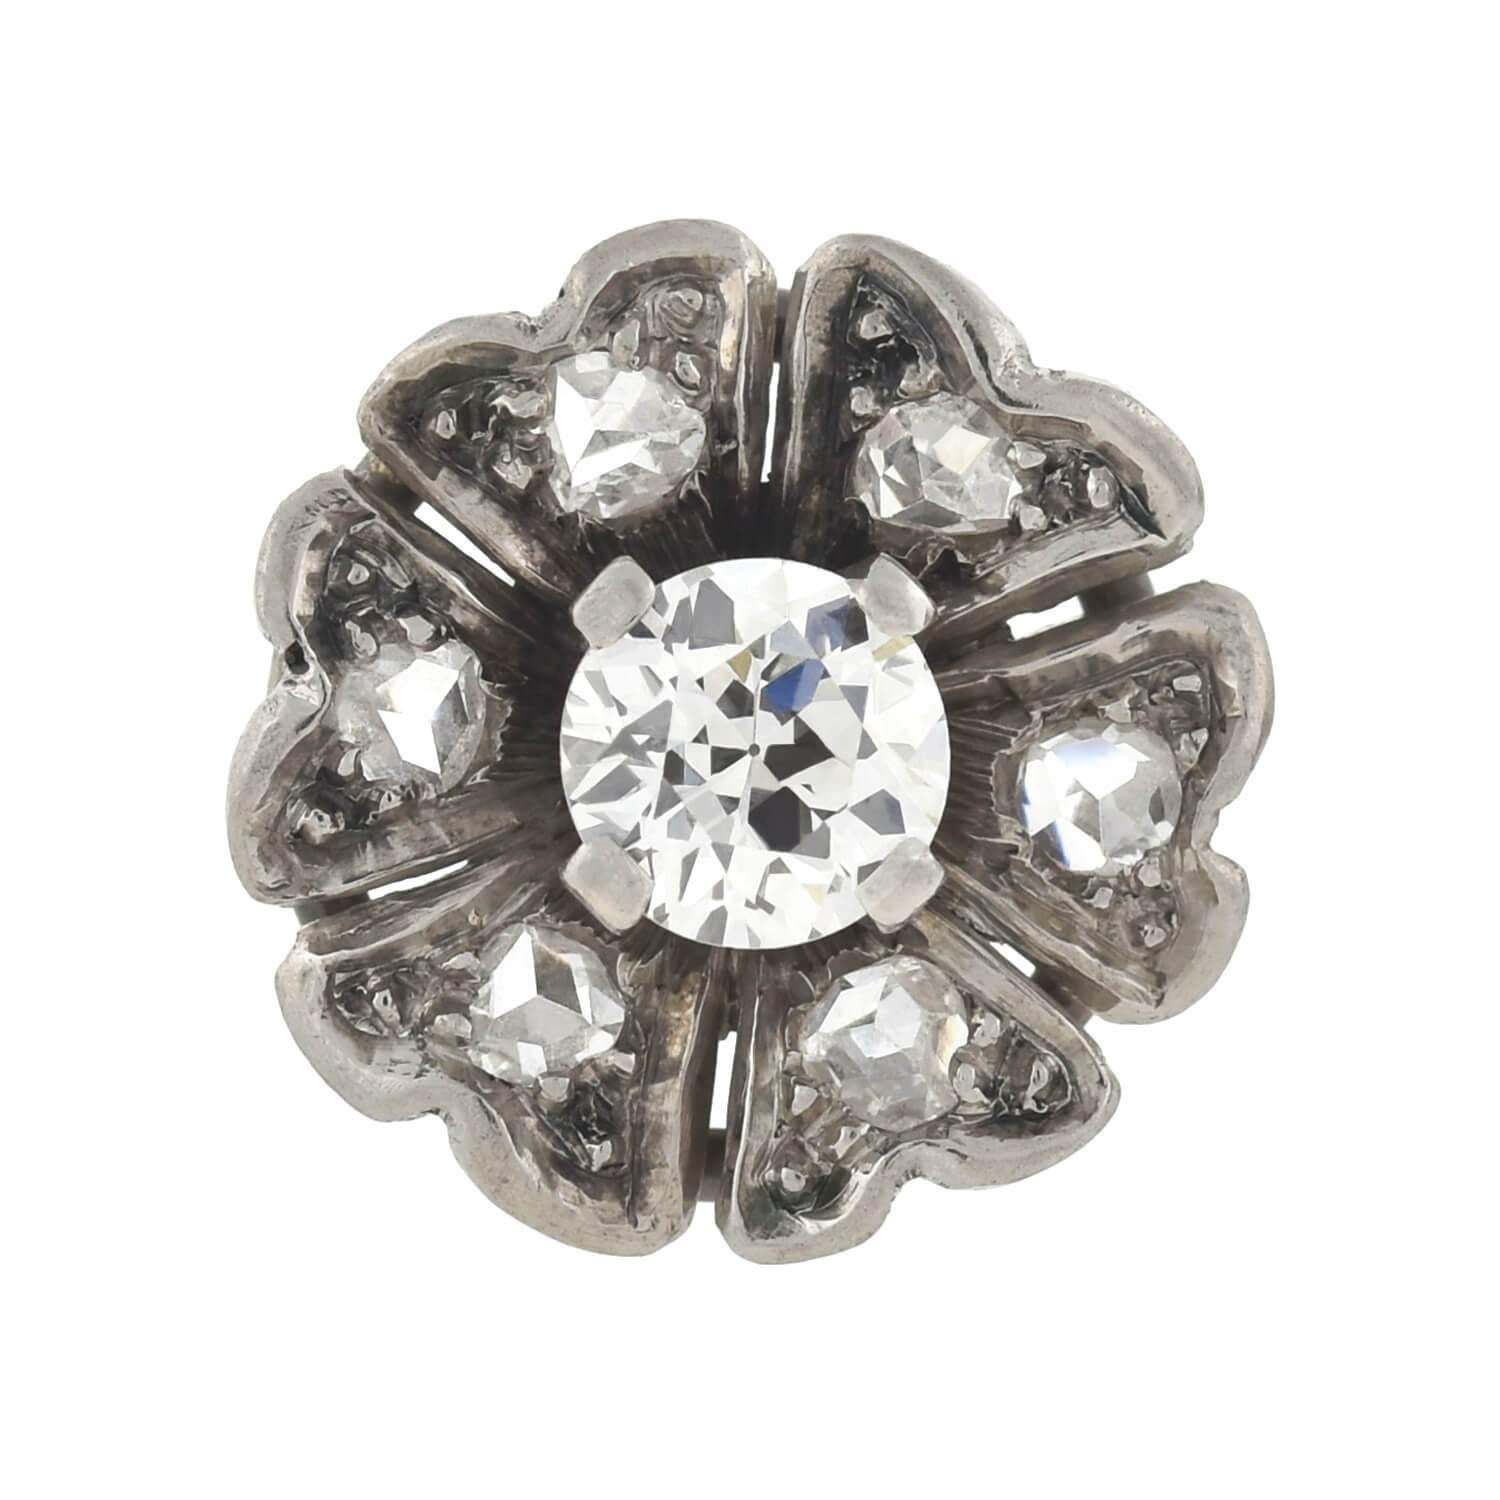 A stunning pair of diamond flower studs from the Edwardian (ca1910) era! Each earring is crafted in platinum and displays a sparkling diamond encrusted design. The 3-dimensional flowers have five curved petals, each one set with a gorgeous old Rose